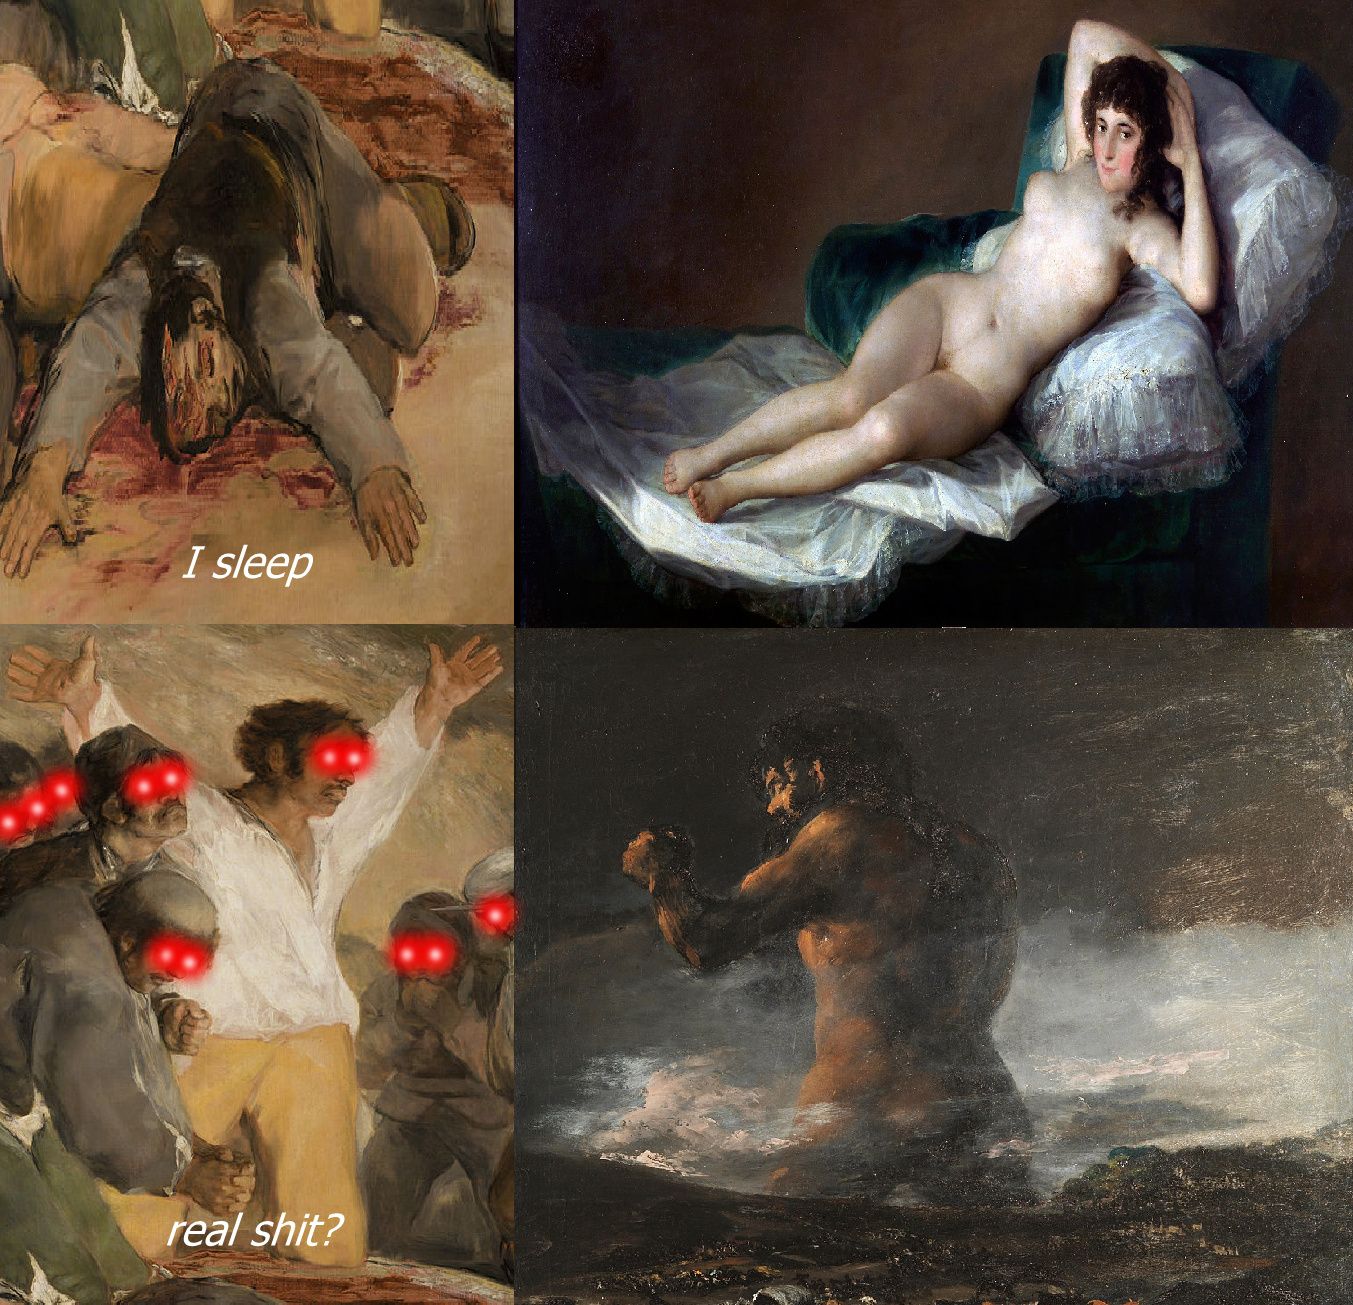 Goya was truly one of the original shitposters